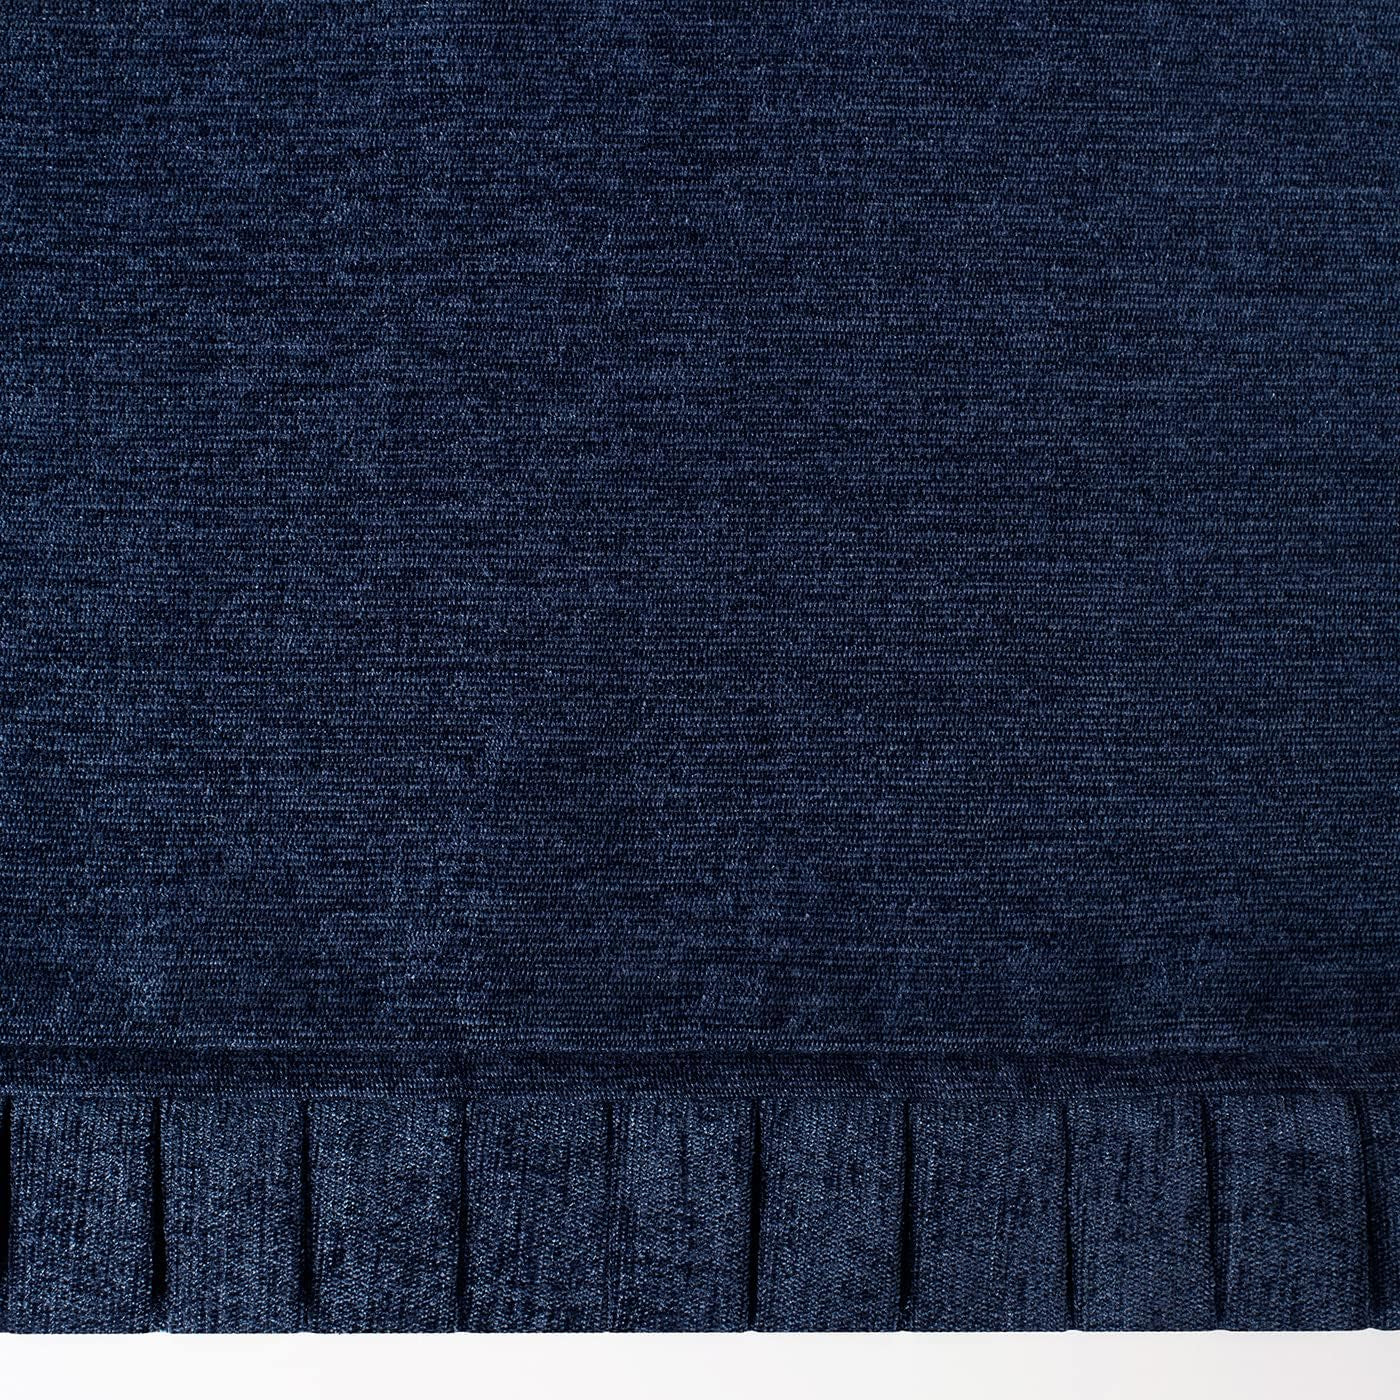 Woven Trends Semi Sheer Pinch Pleated Curtains, Solid Farmhouse and Modern Rustic Curtains, Chenille Cloth with Box Pleated Edges for Living Room, Bedroom, 52" W X 14" L, Navy Blue  Woven Trends   